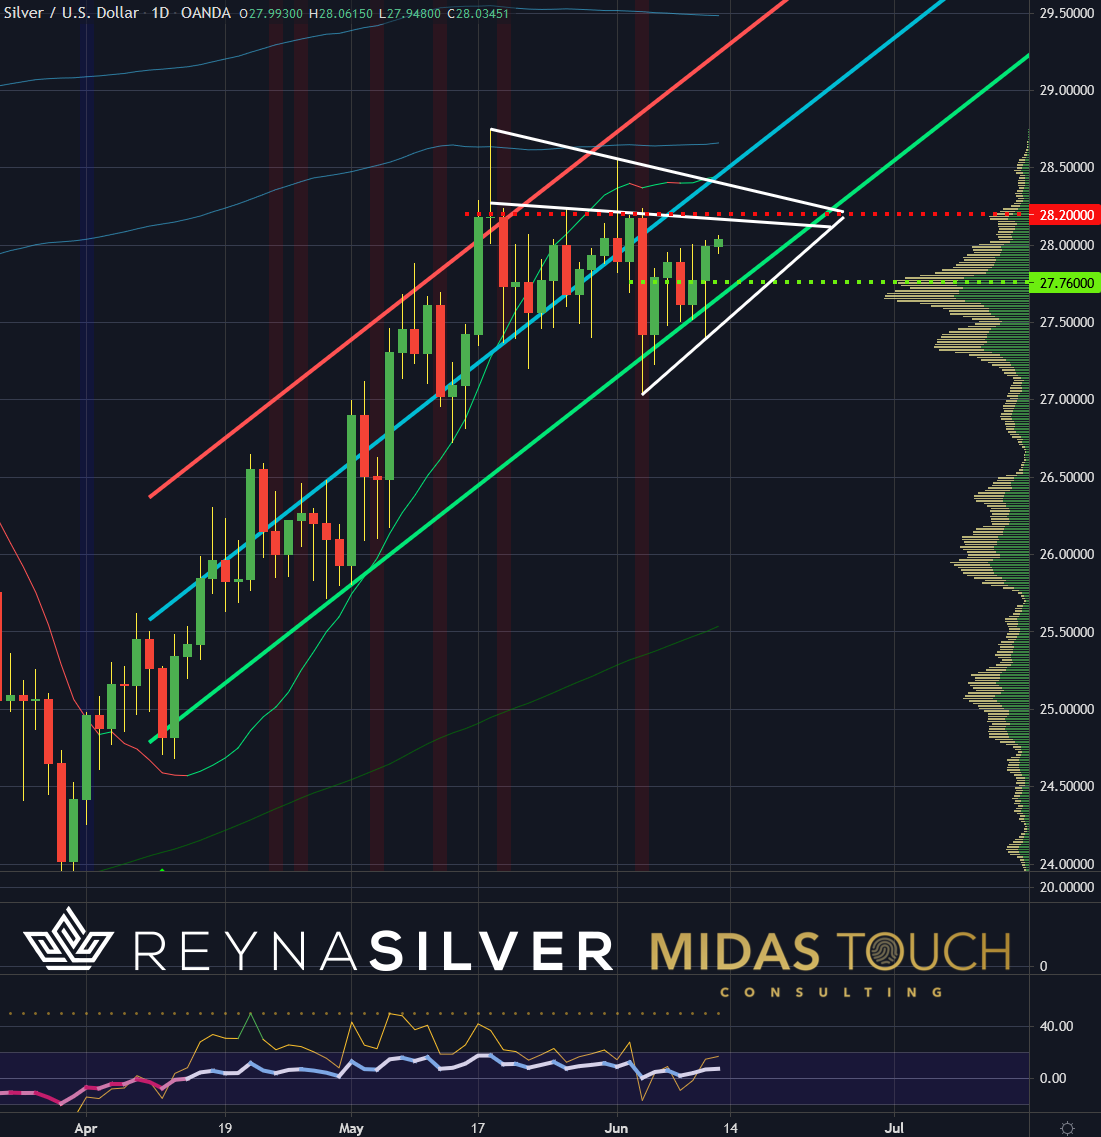 Silver in US-Dollar, daily chart as of June11th, 2021.